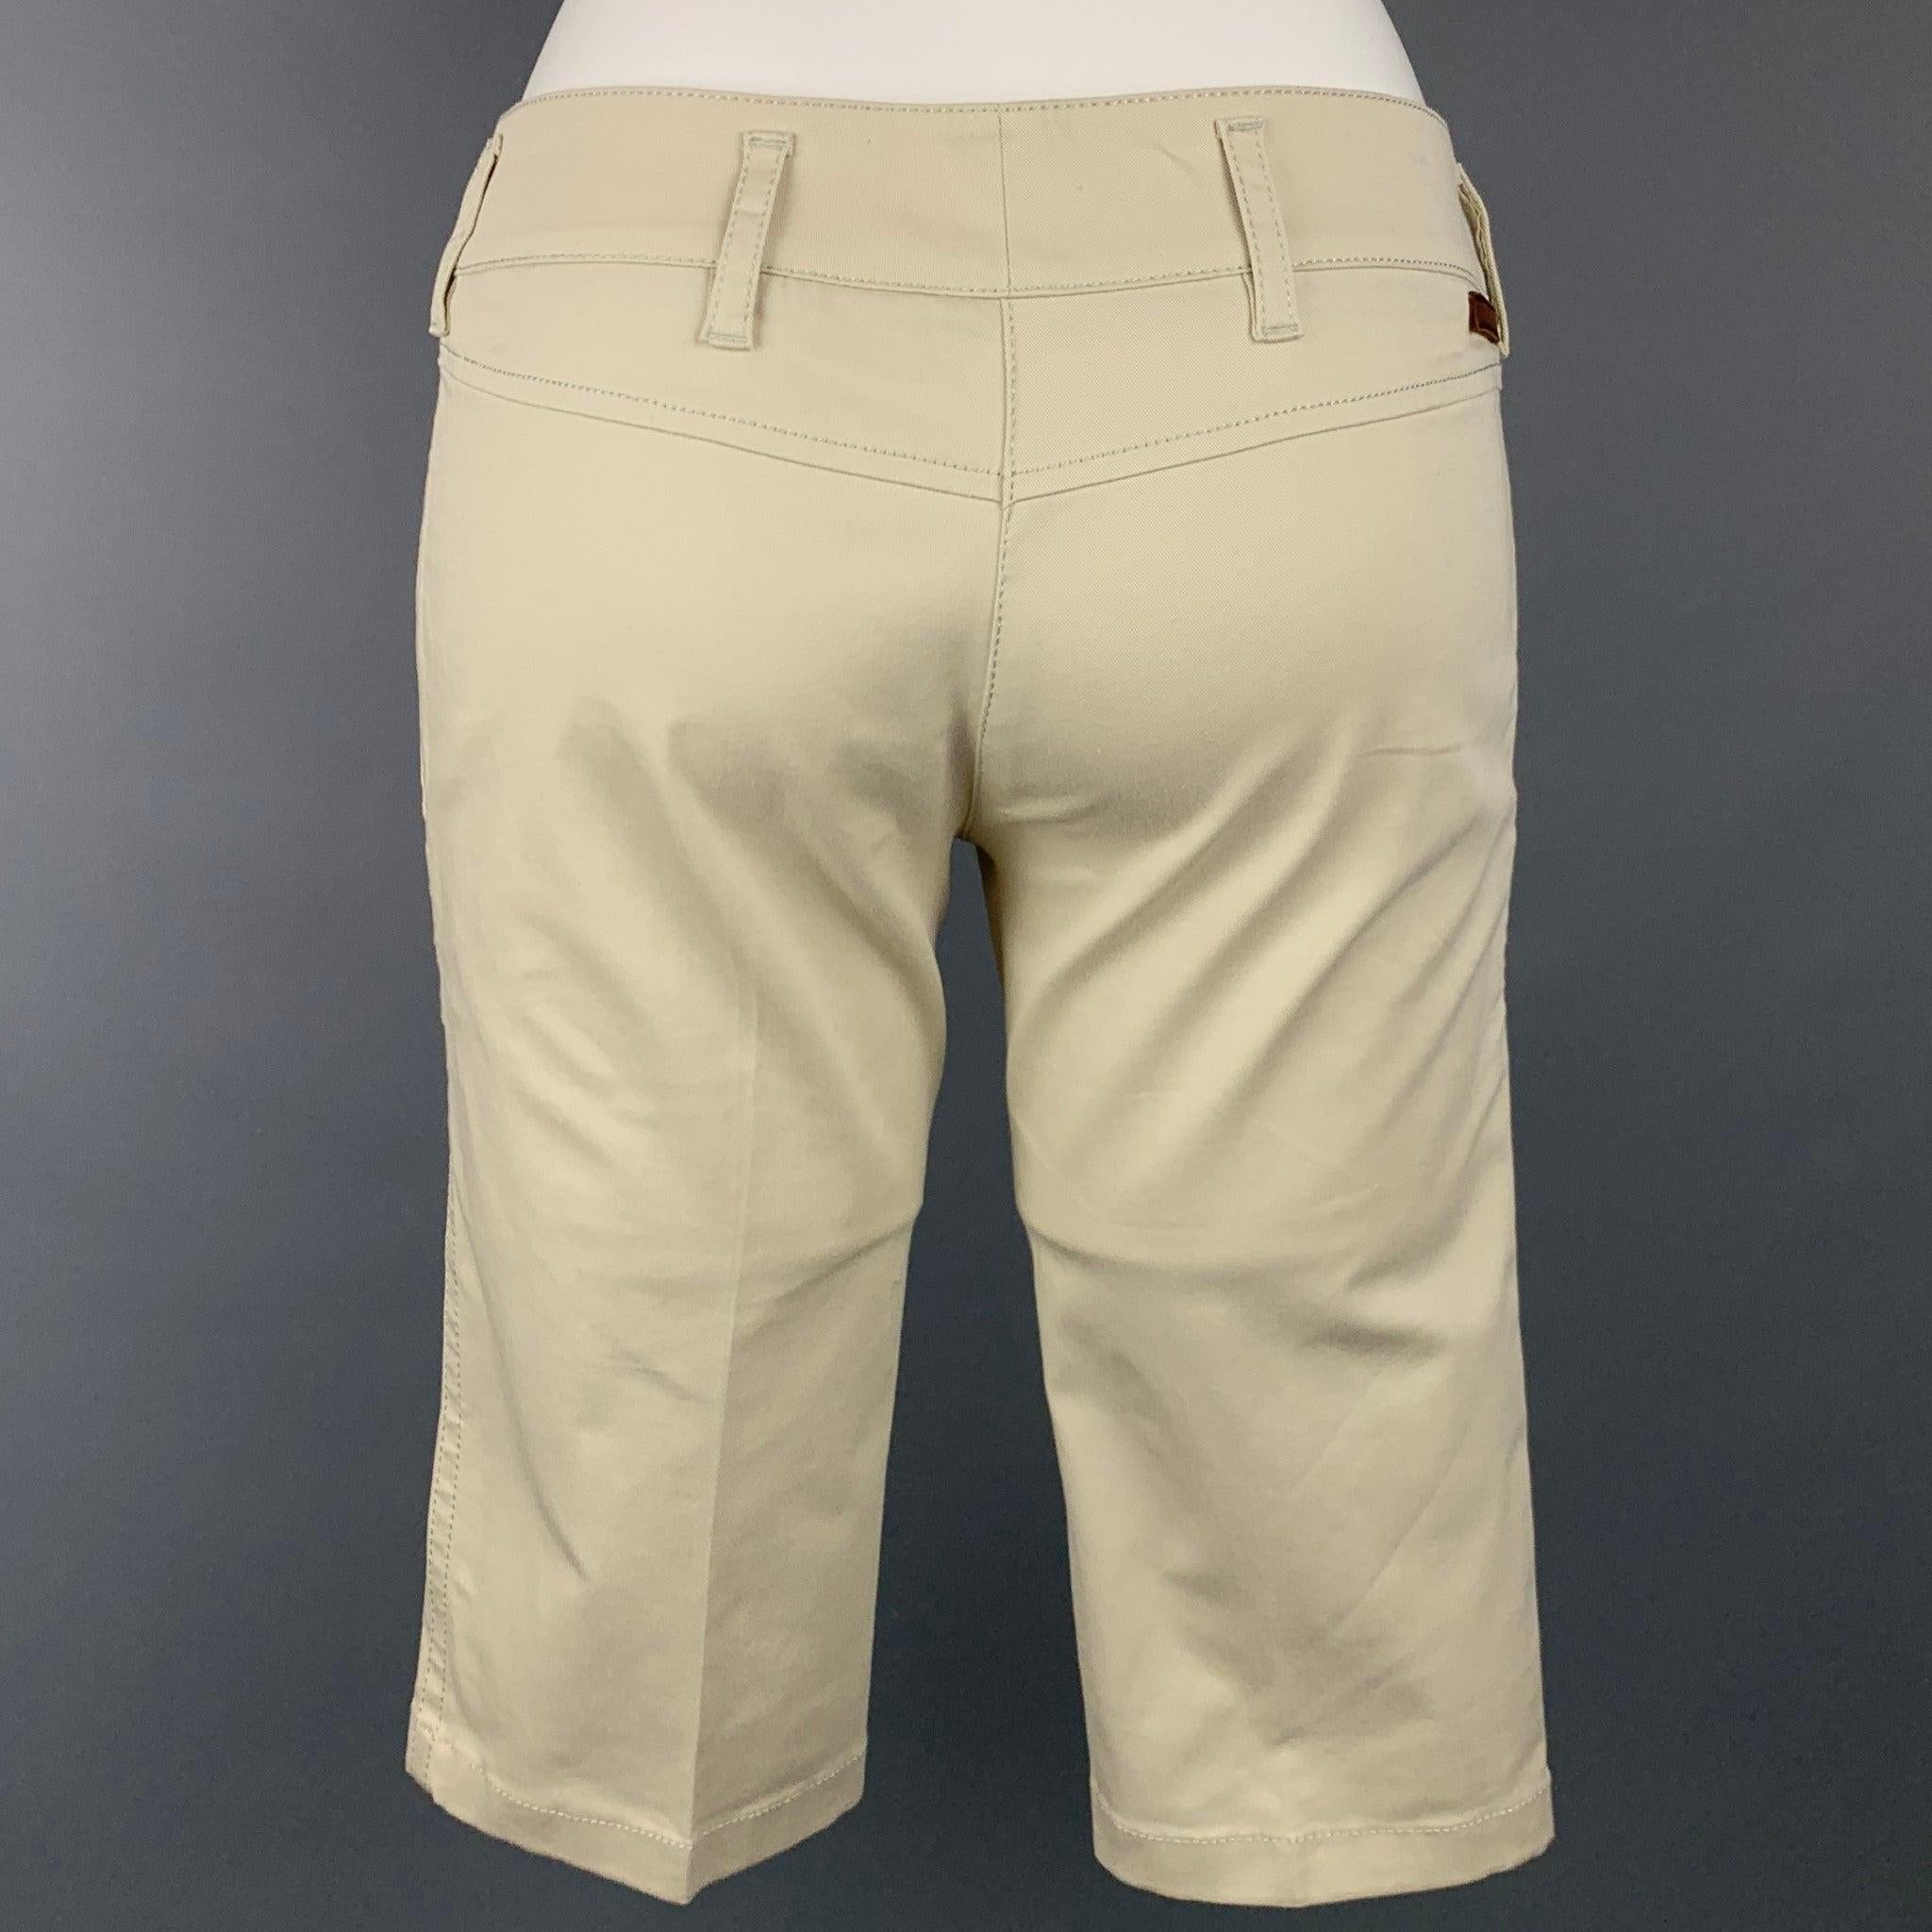 PRADA shorts comes in a beige cotton featuring a bermuda style, slit pockets, zip fly, and a double front tab closure.Very Good
Pre-Owned Condition. 

Marked:   38 

Measurements: 
  Waist: 30 inches  Rise: 7.5 inches  Inseam: 14 inches 
  
  
